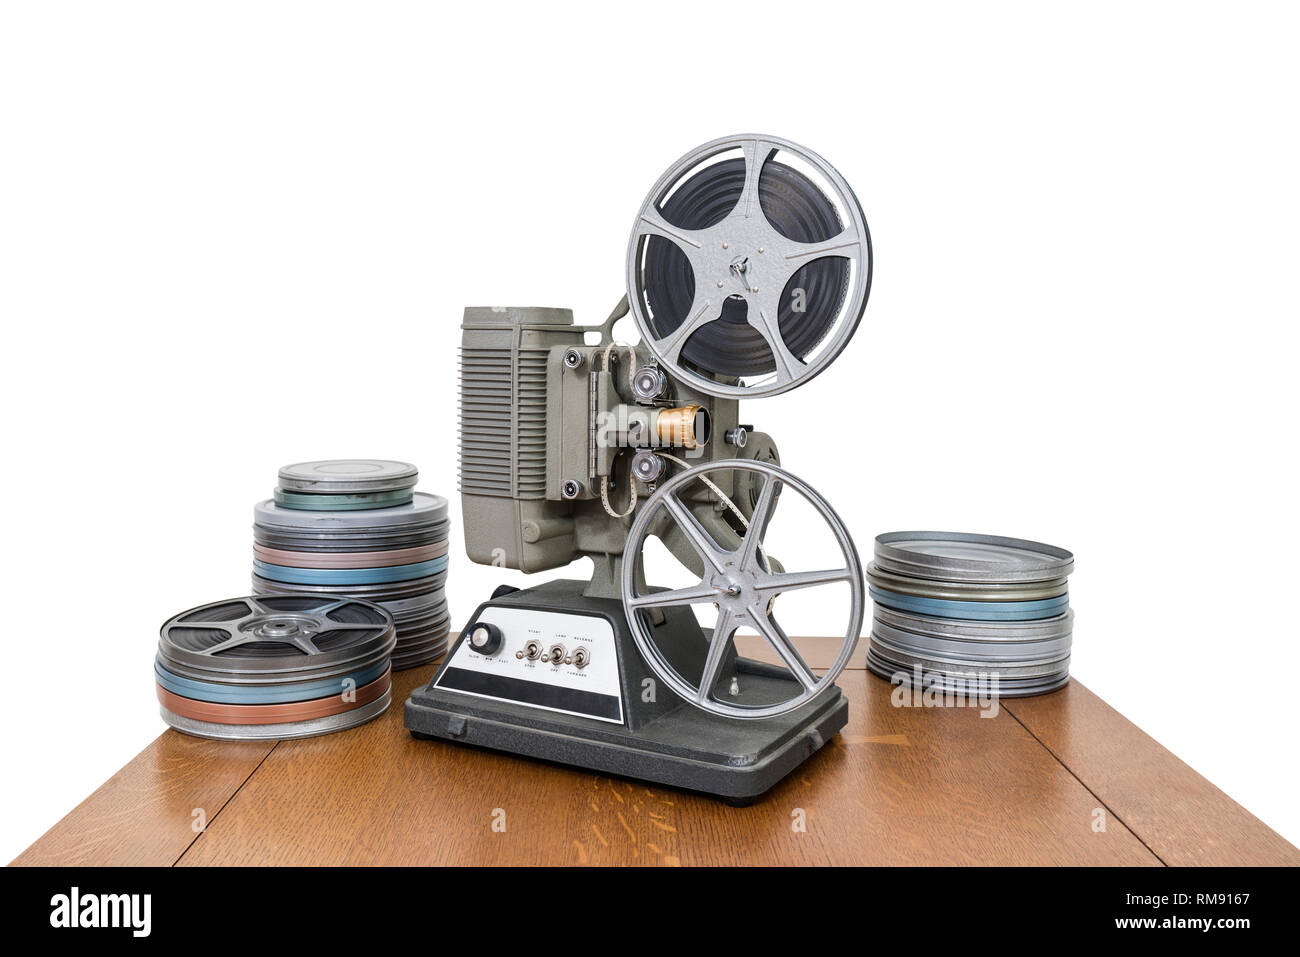 Vintage 8mm home movie projector and film cans isolated on white